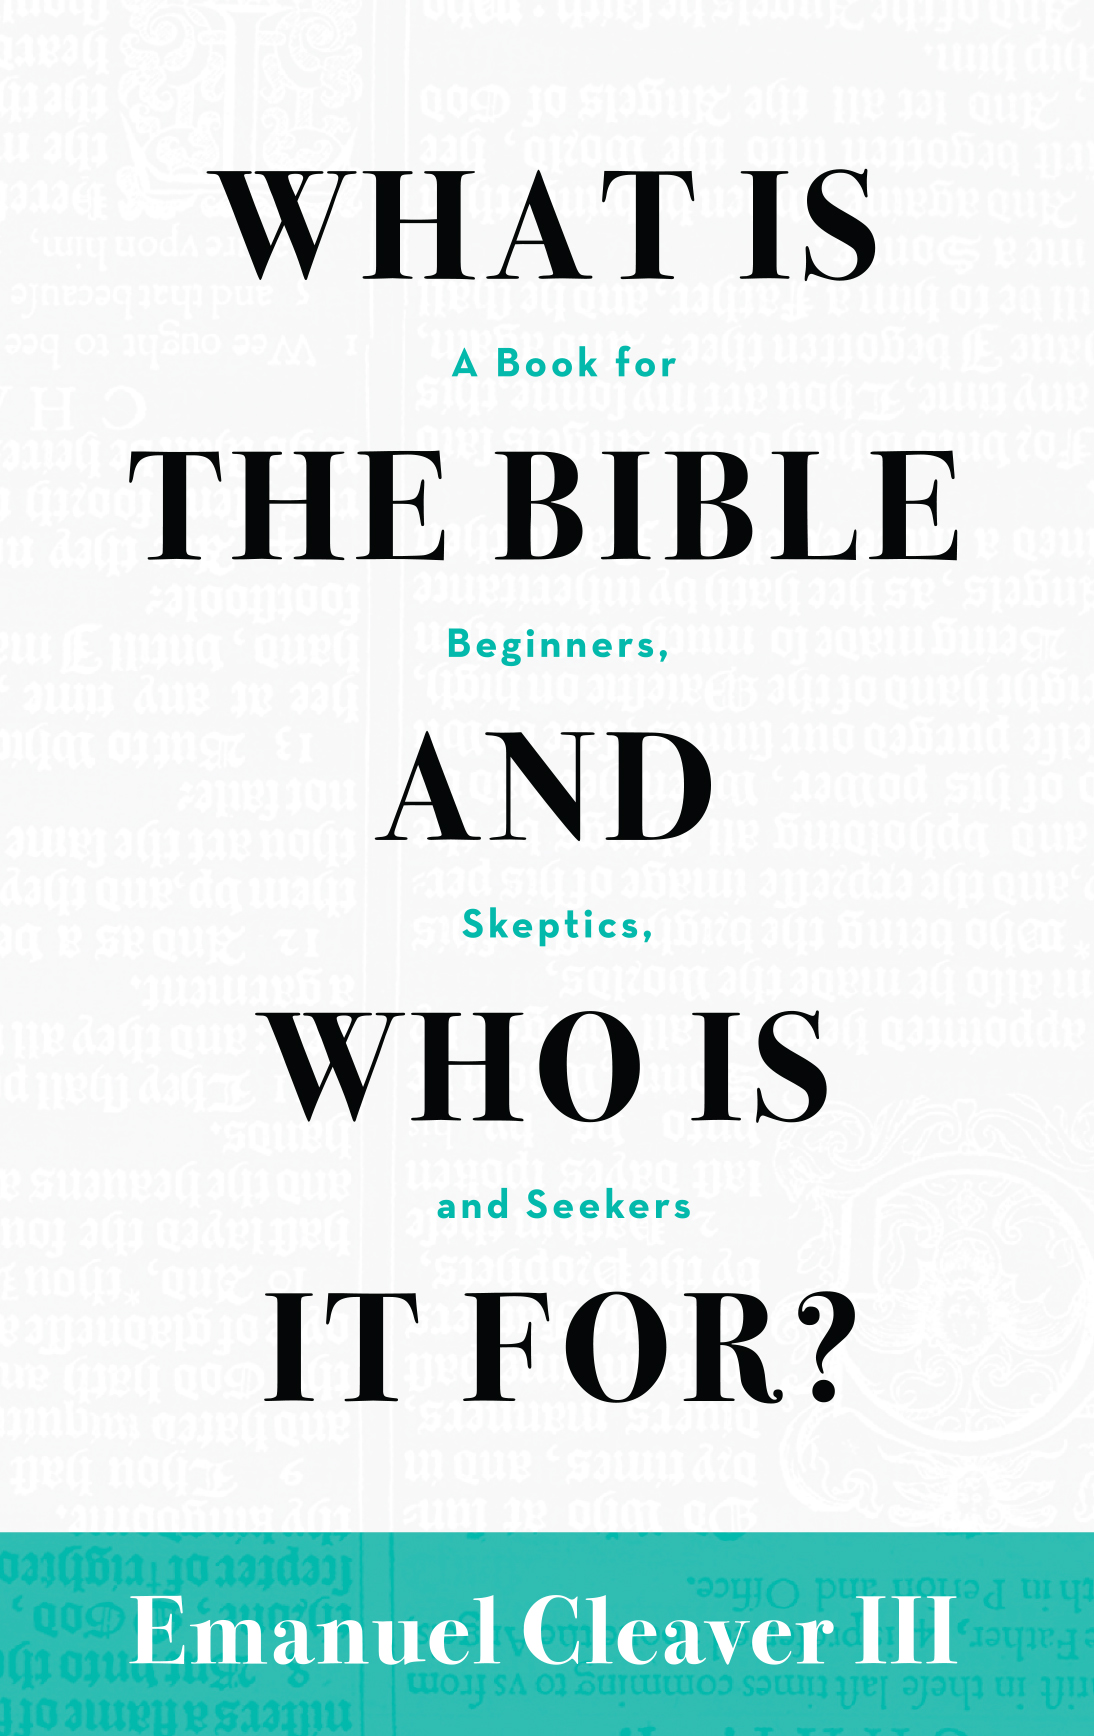 What Is the Bible and Who Is It For? A Book for Beginners, Skeptics, and Seekers